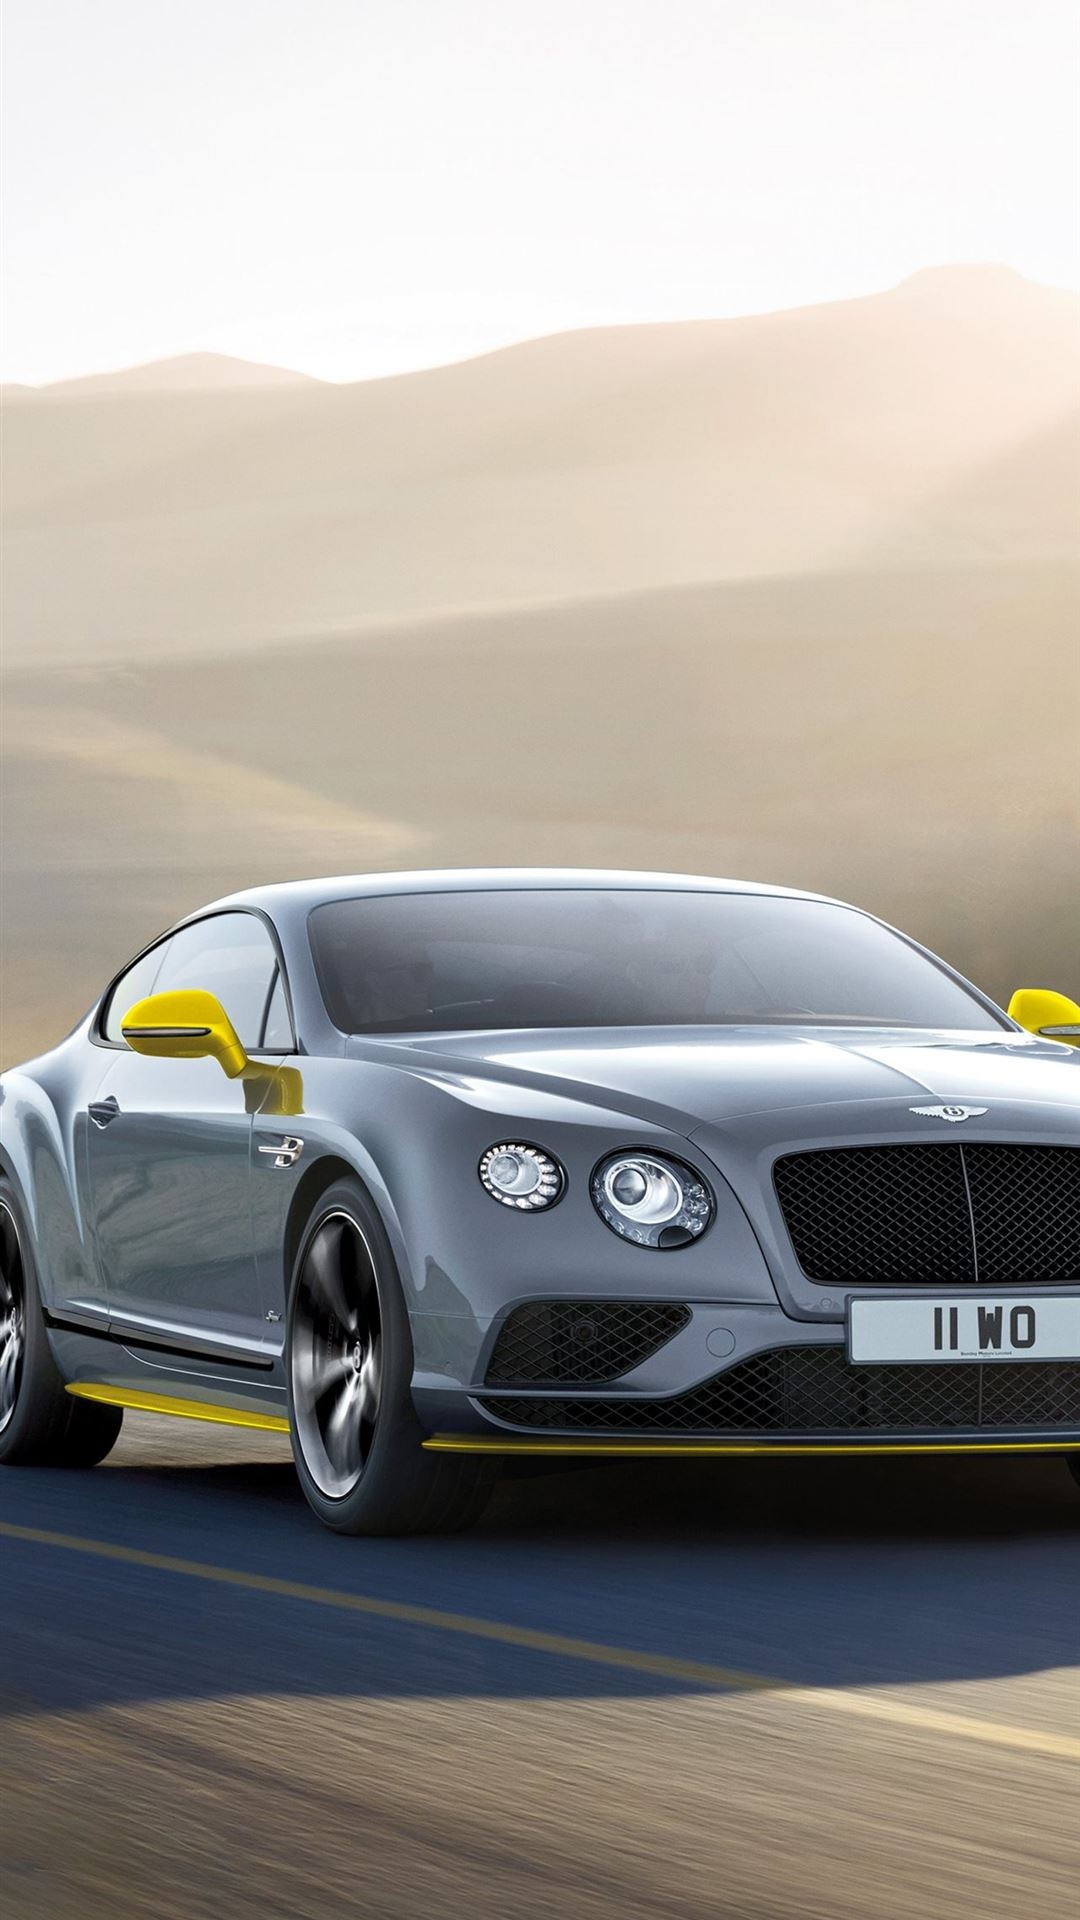 Bentley Continental, GT Speed iPhone wallpapers, Auto, Free download, 1080x1920 Full HD Phone